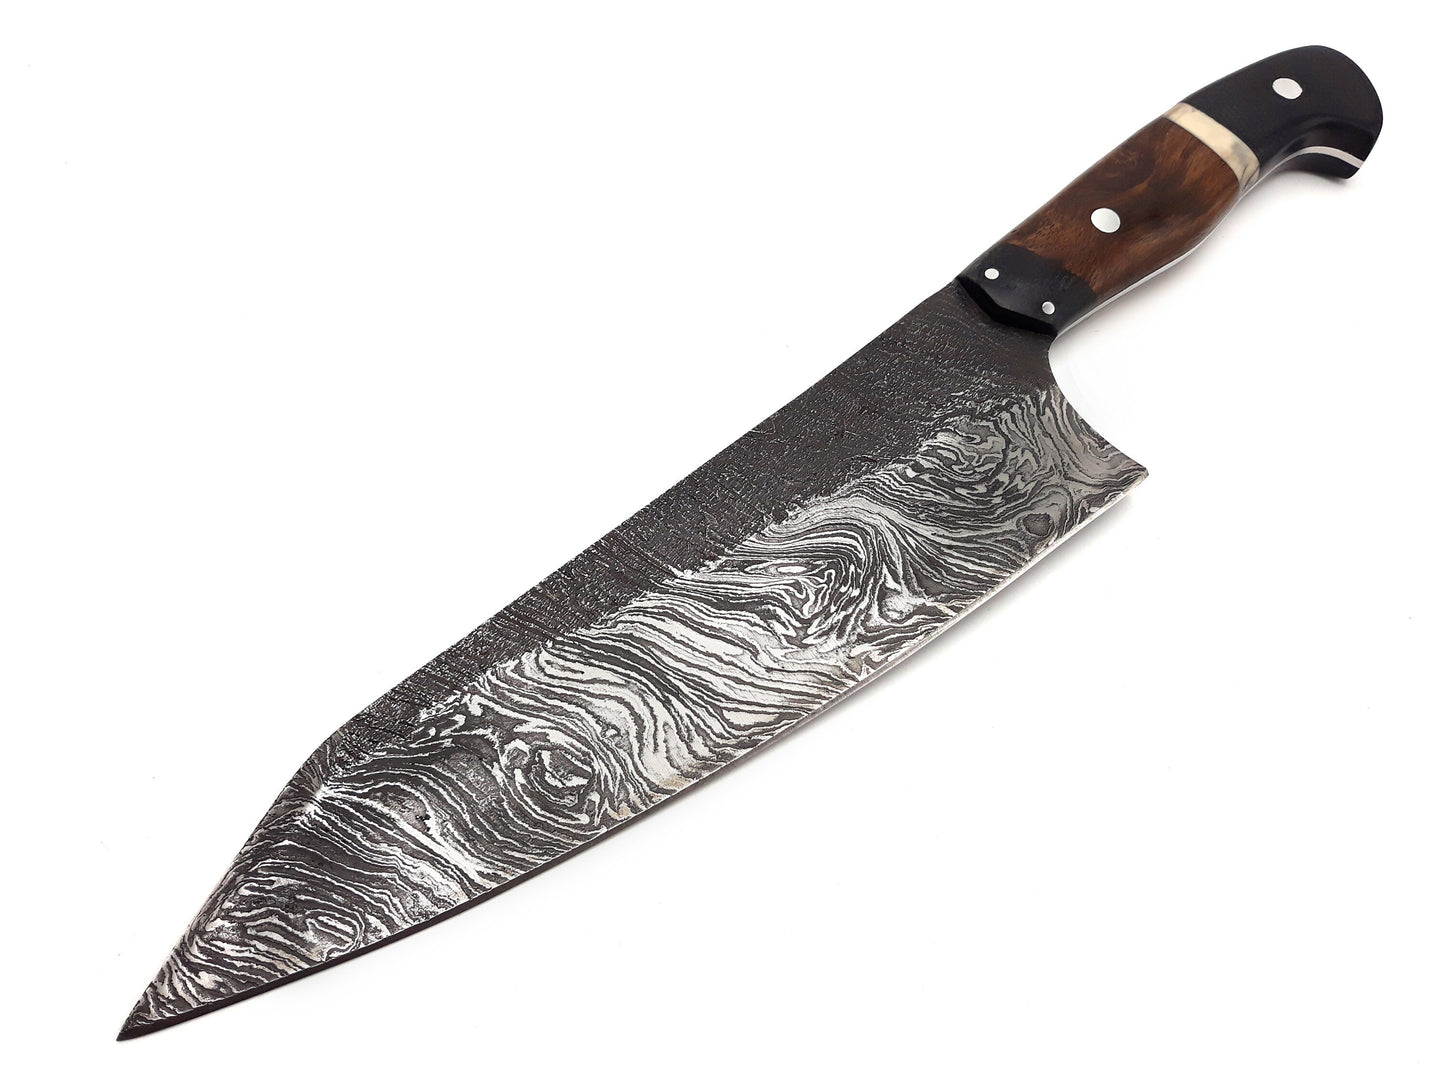 Damascus Steel, Chef Knife, Kitchen Knife, Handmade Knife, Christmas Gift, Father's Day Gift, Anniversary Gift, Butcher Knife